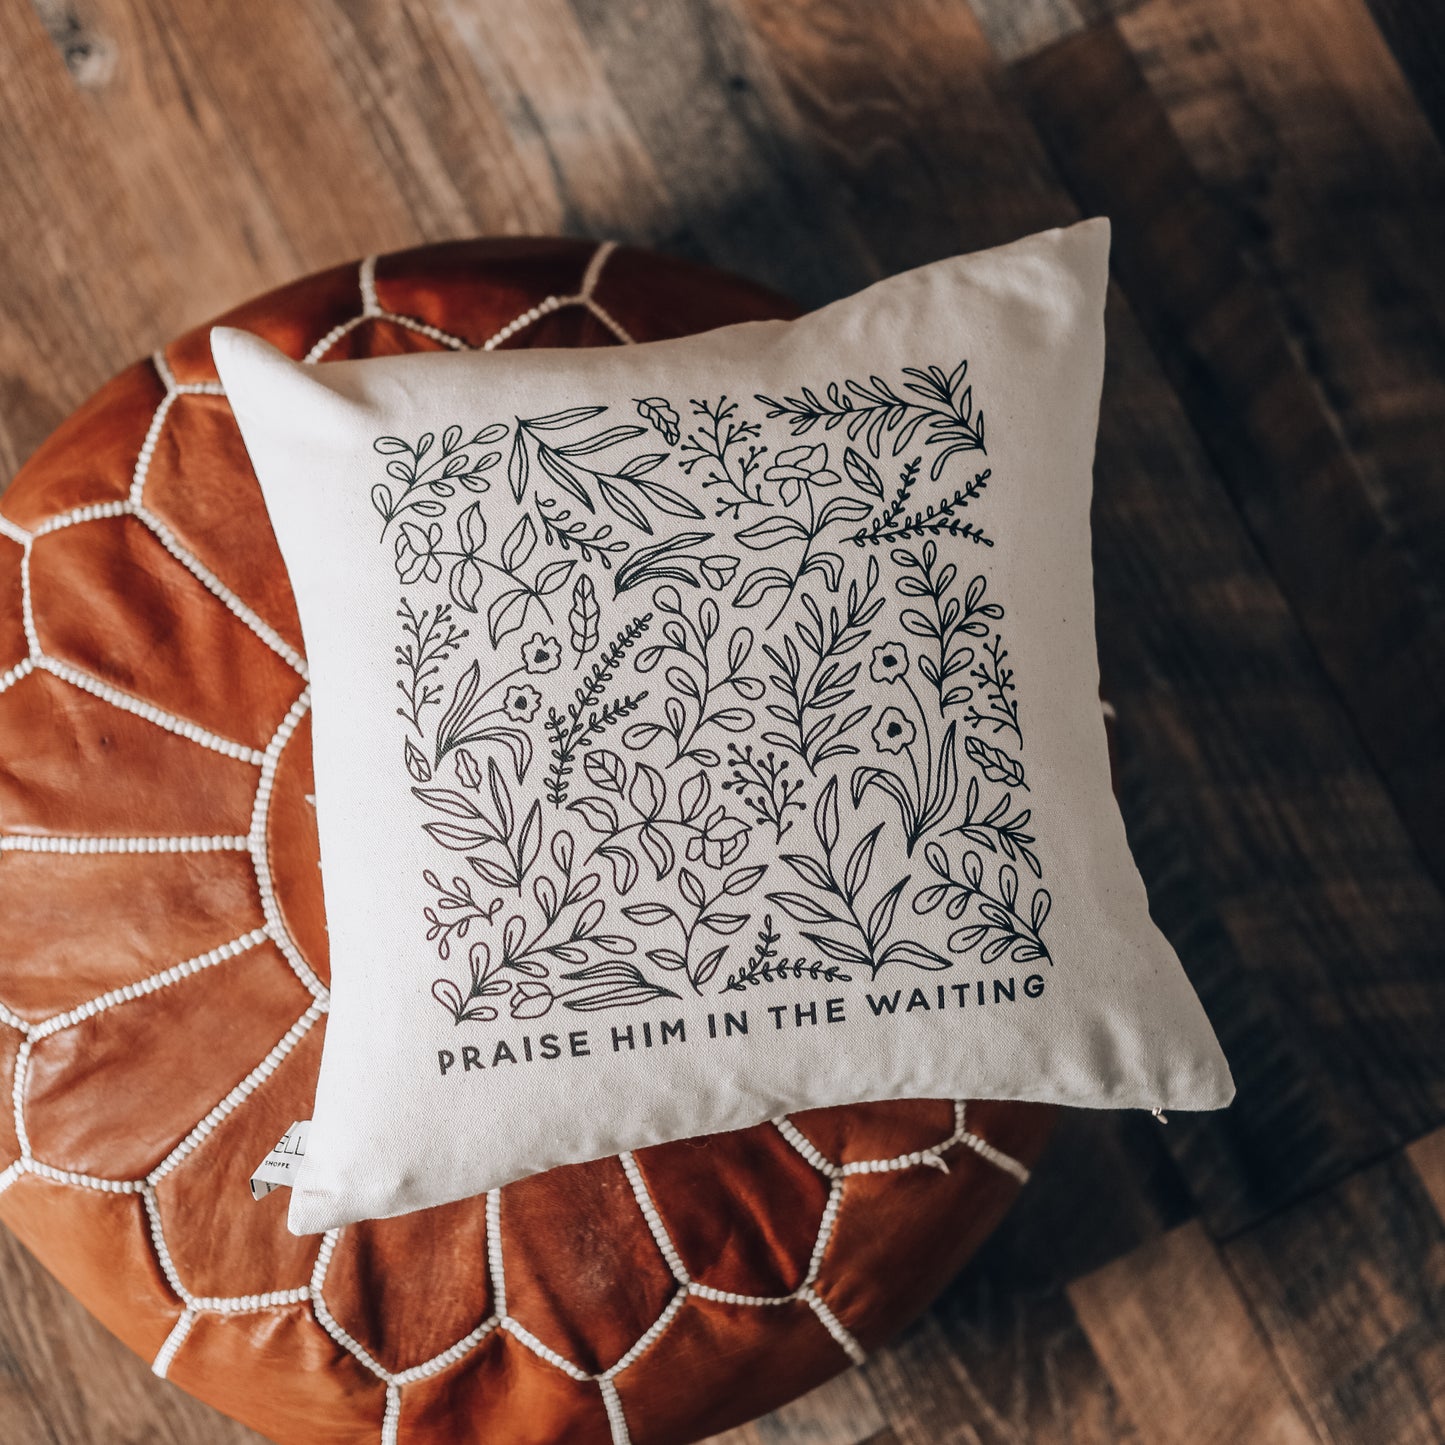 Praise Him in the Waiting Pillow Cover